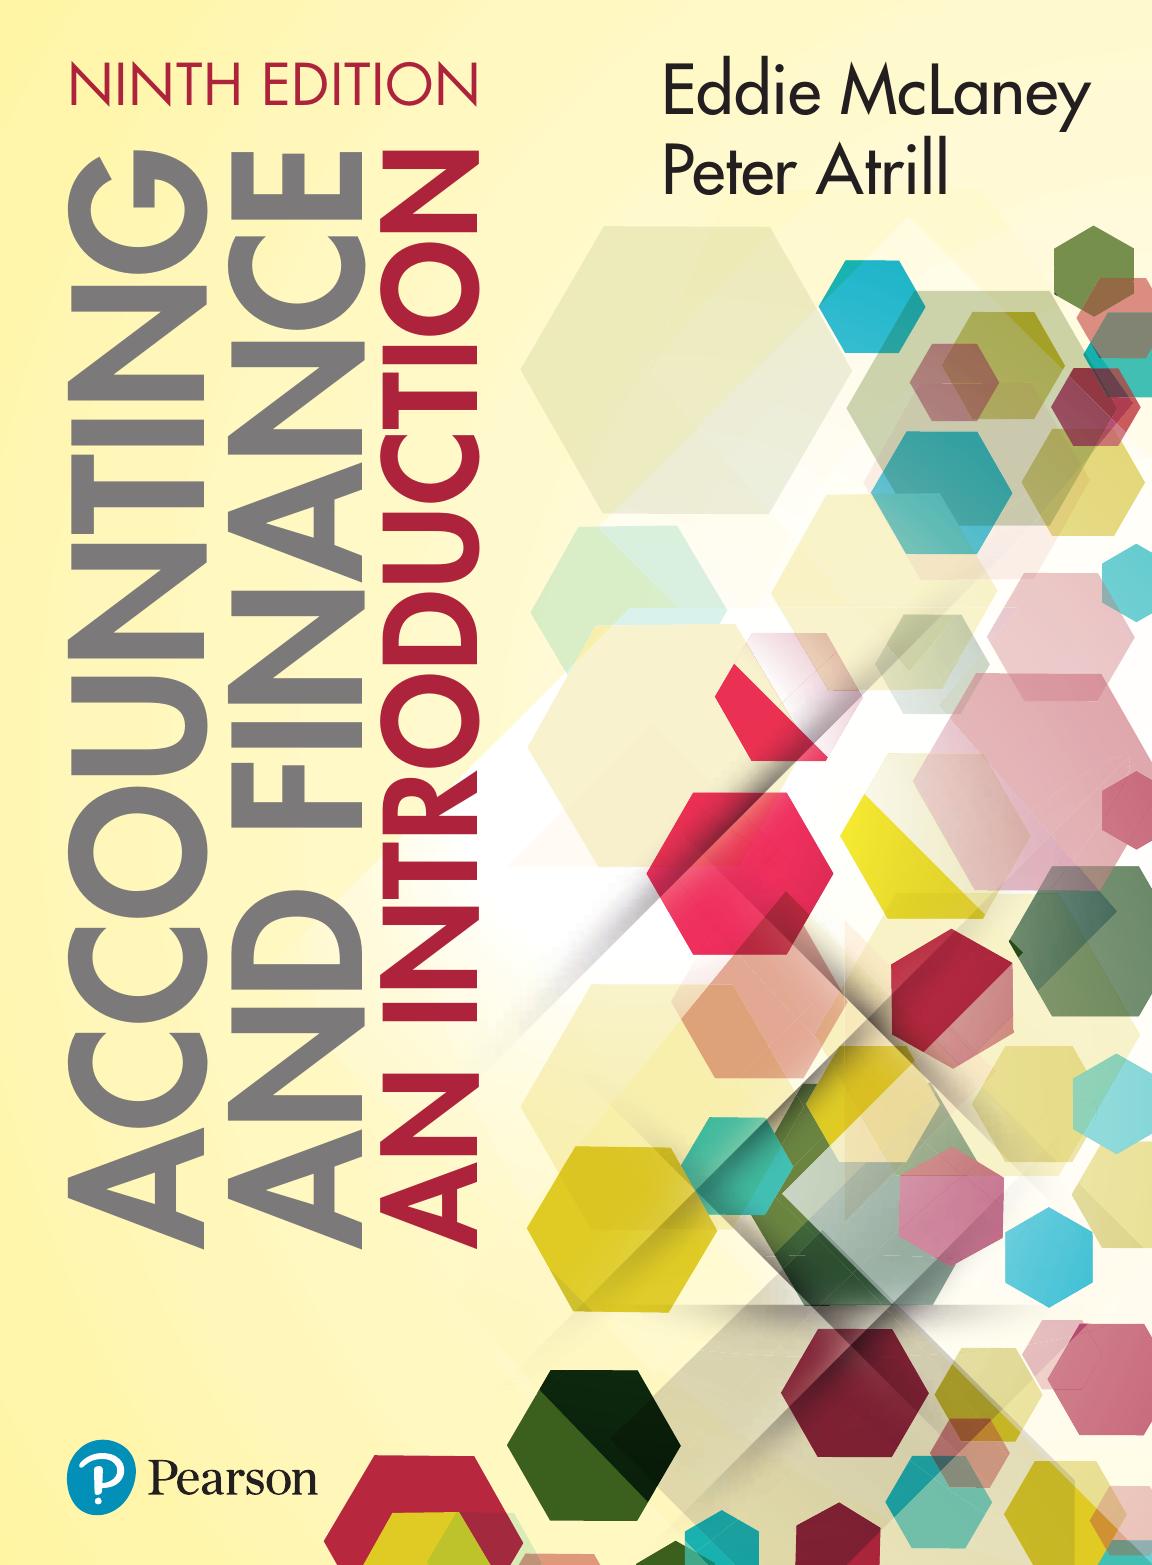 Accounting and Finance An Introduction 9th Edition- Eddie McLaney - Eddie McLaney & Peter Atrill.jpg